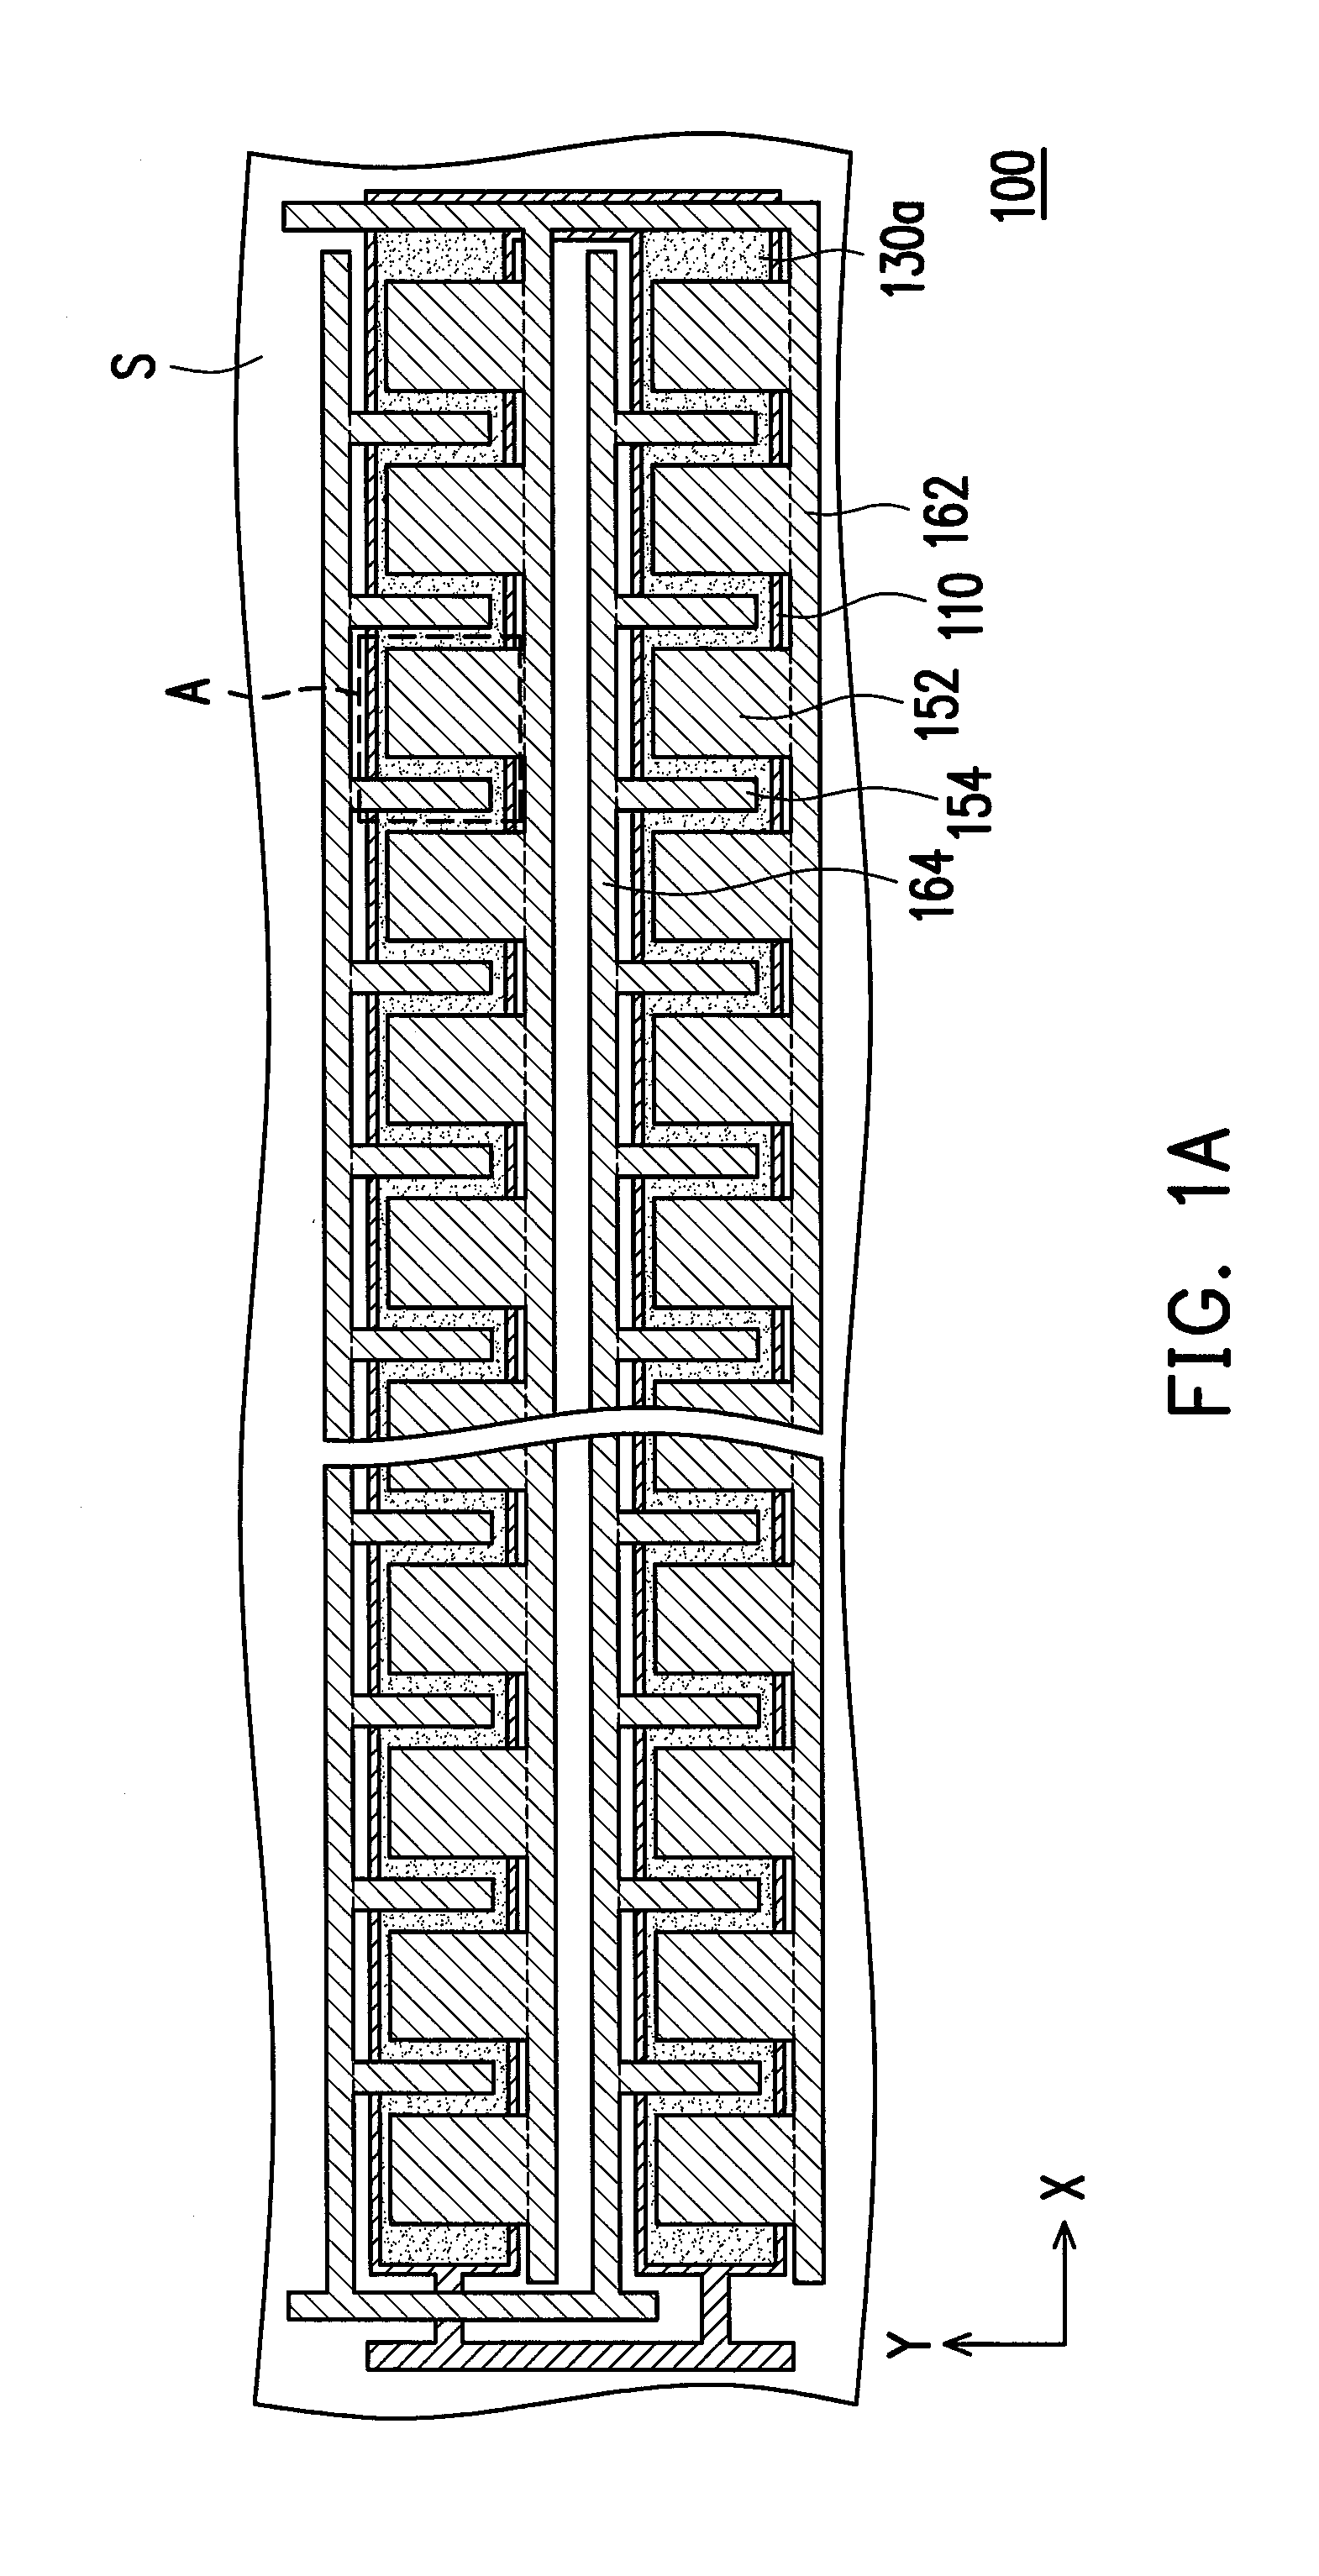 Transistor structure and driving circuit structure